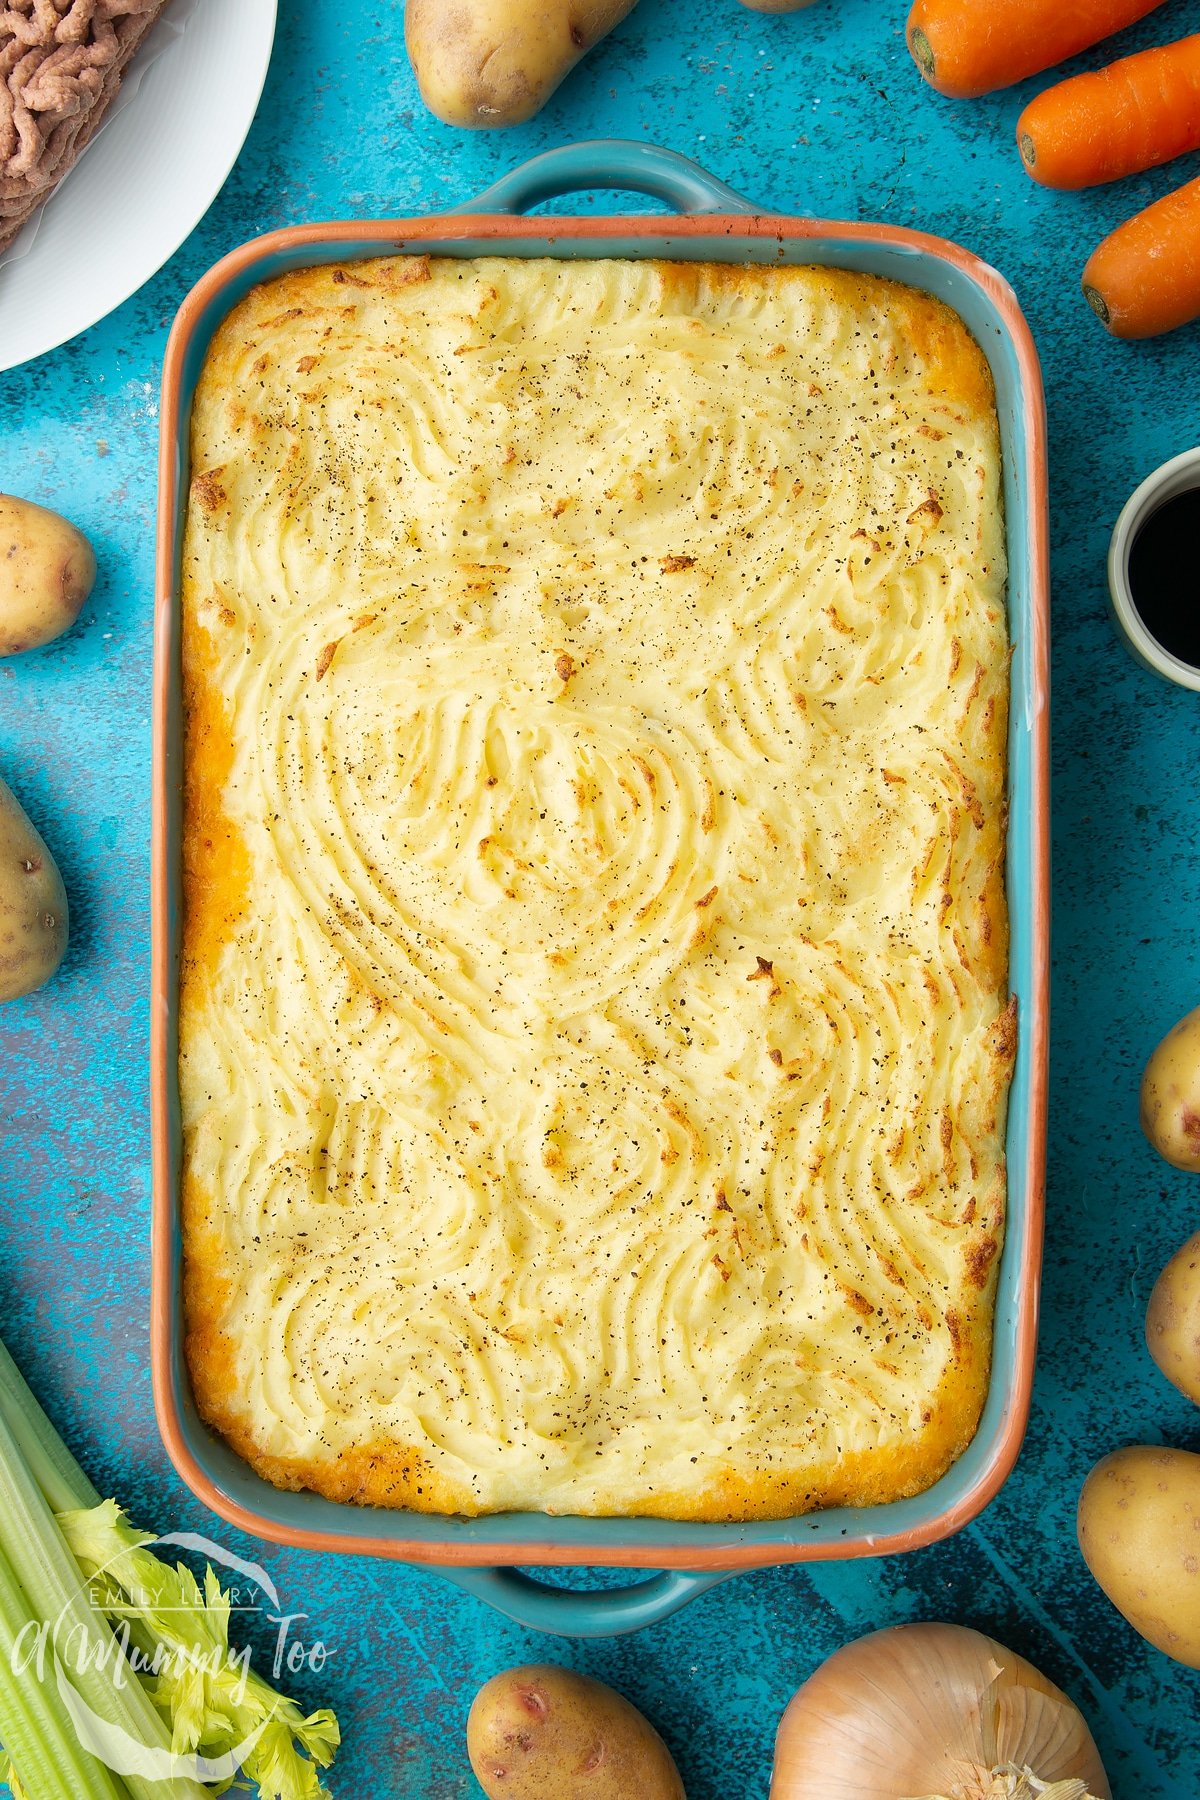 Freshly baked meat free cottage pie in a green roasting dish. Ingredients to make vegan cottage pie surround the dish.